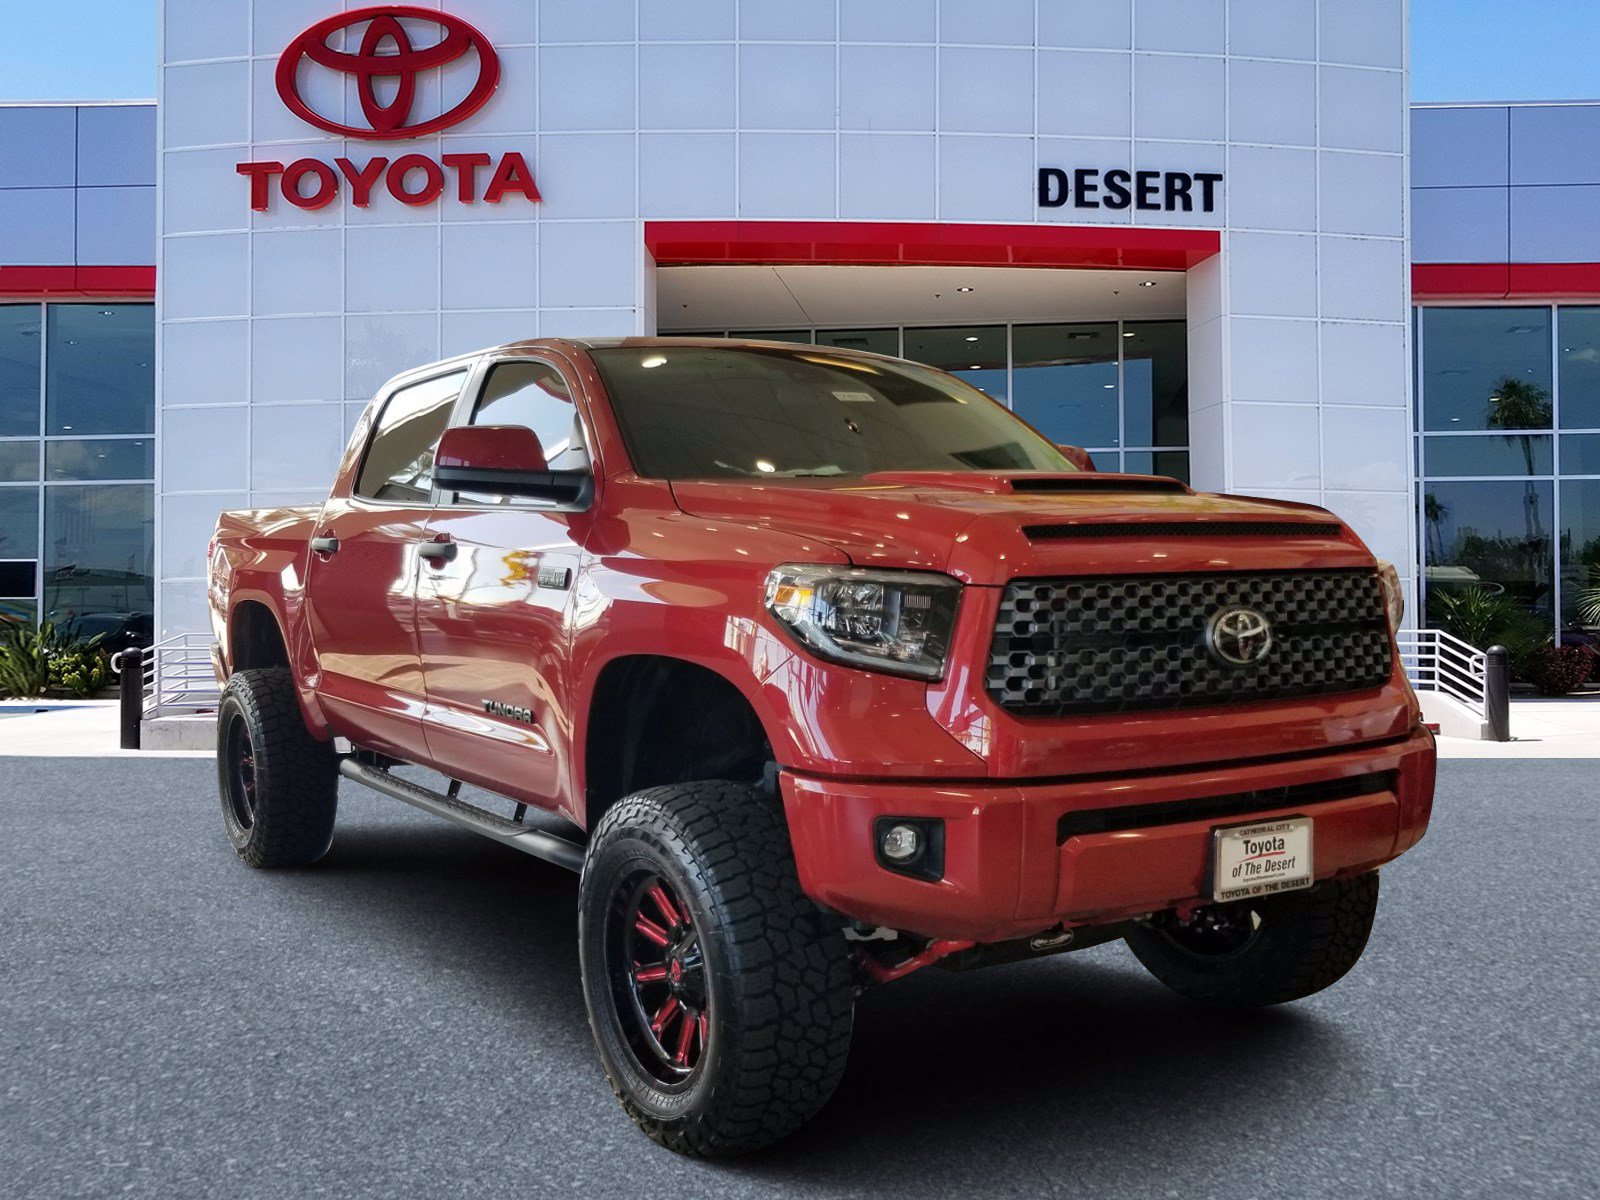 New 2020 Toyota Tundra 4WD SR5 Crew Cab Pickup in Cathedral City #